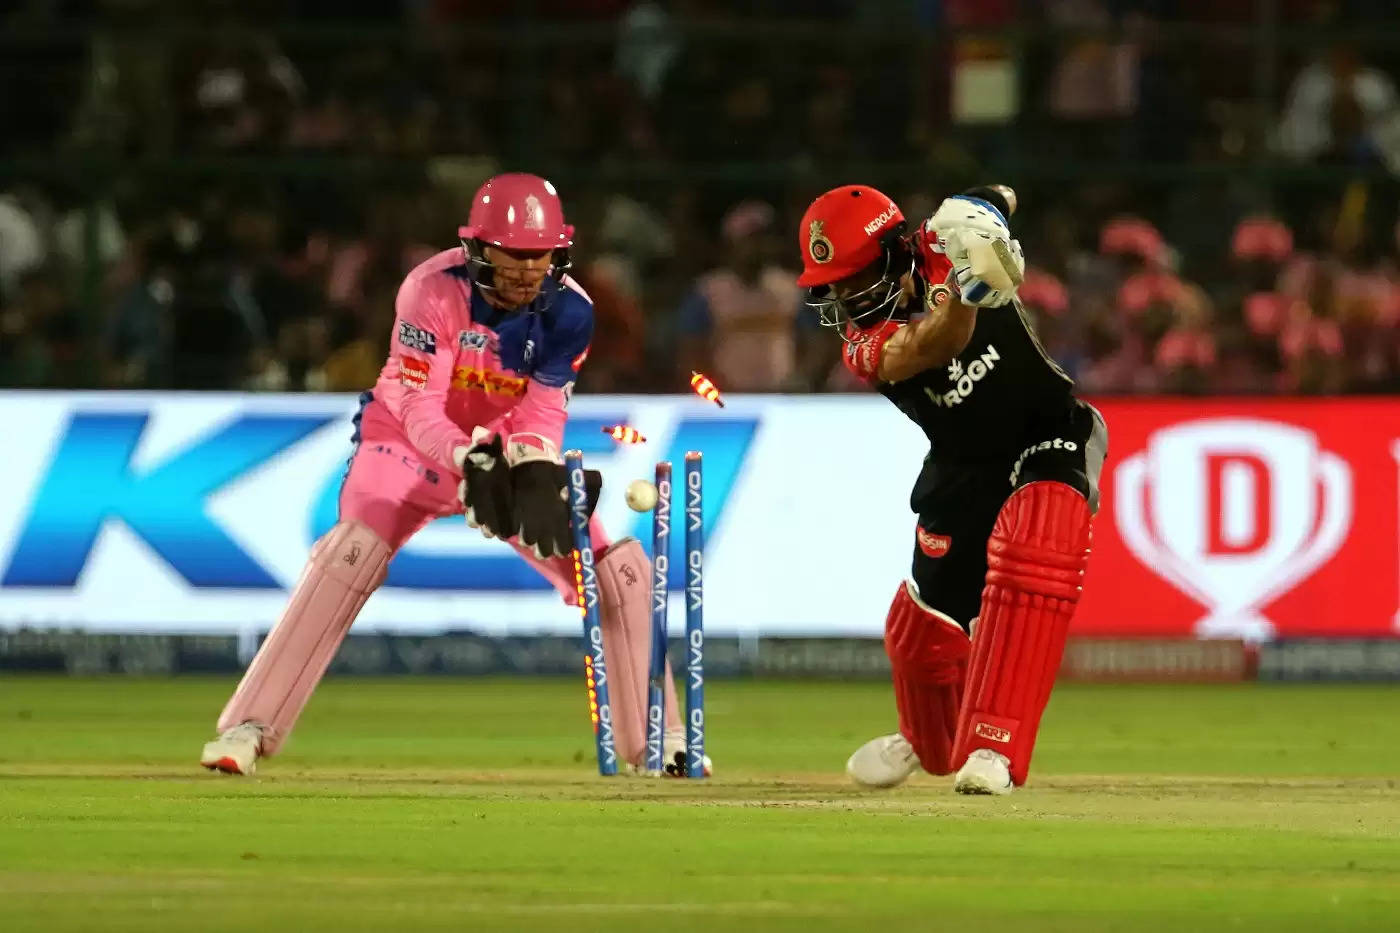 IPL 2020: Can RCB batsmen overcome their issues against spin?